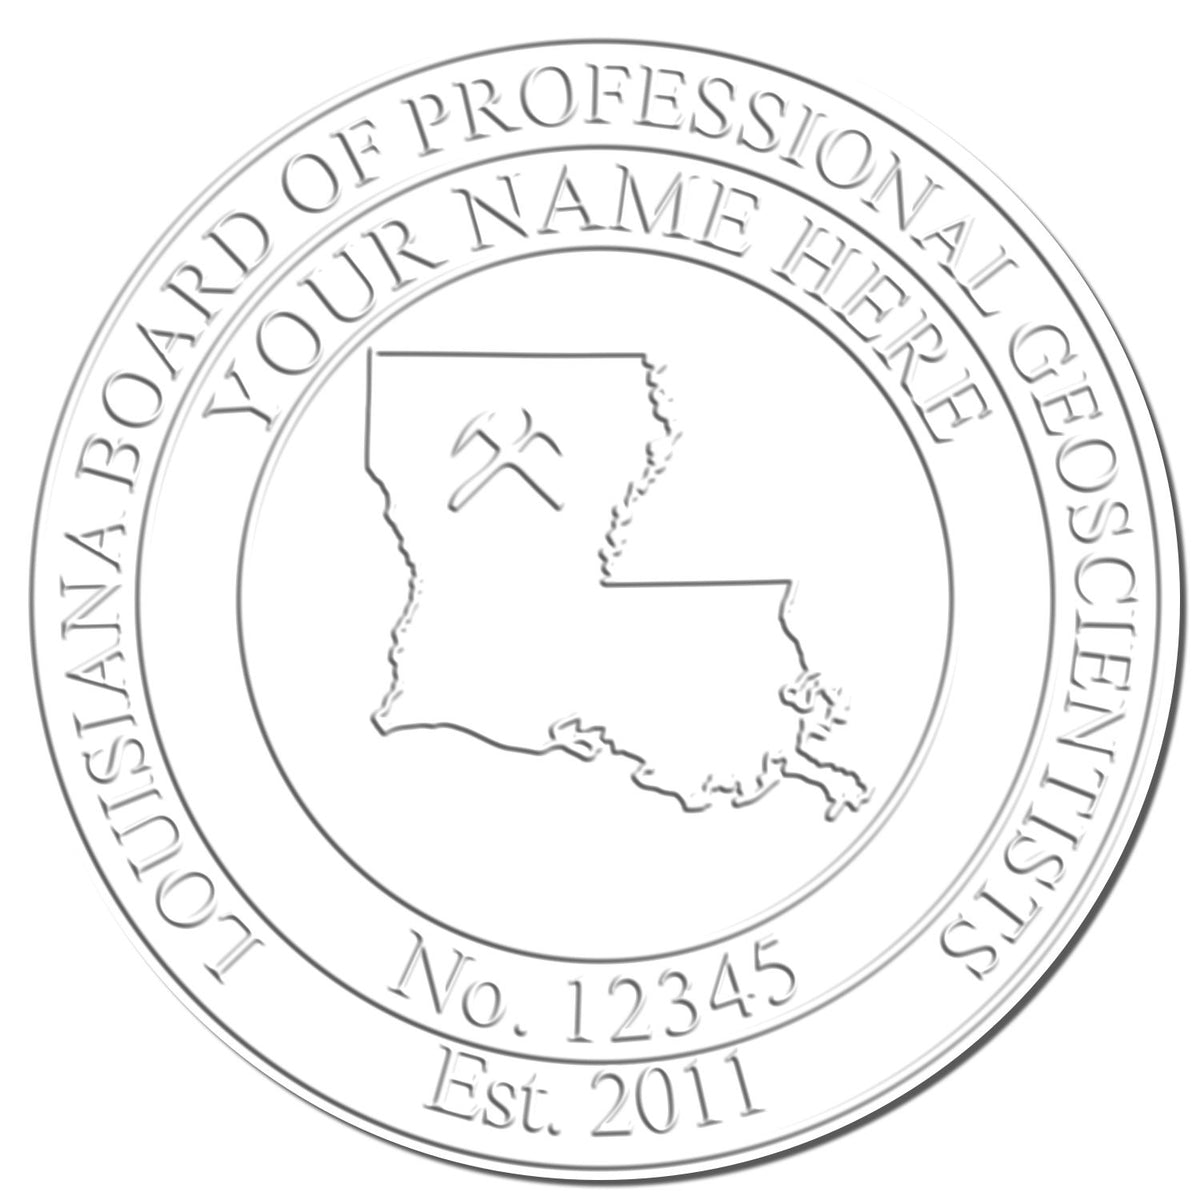 A photograph of the State of Louisiana Extended Long Reach Geologist Seal stamp impression reveals a vivid, professional image of the on paper.